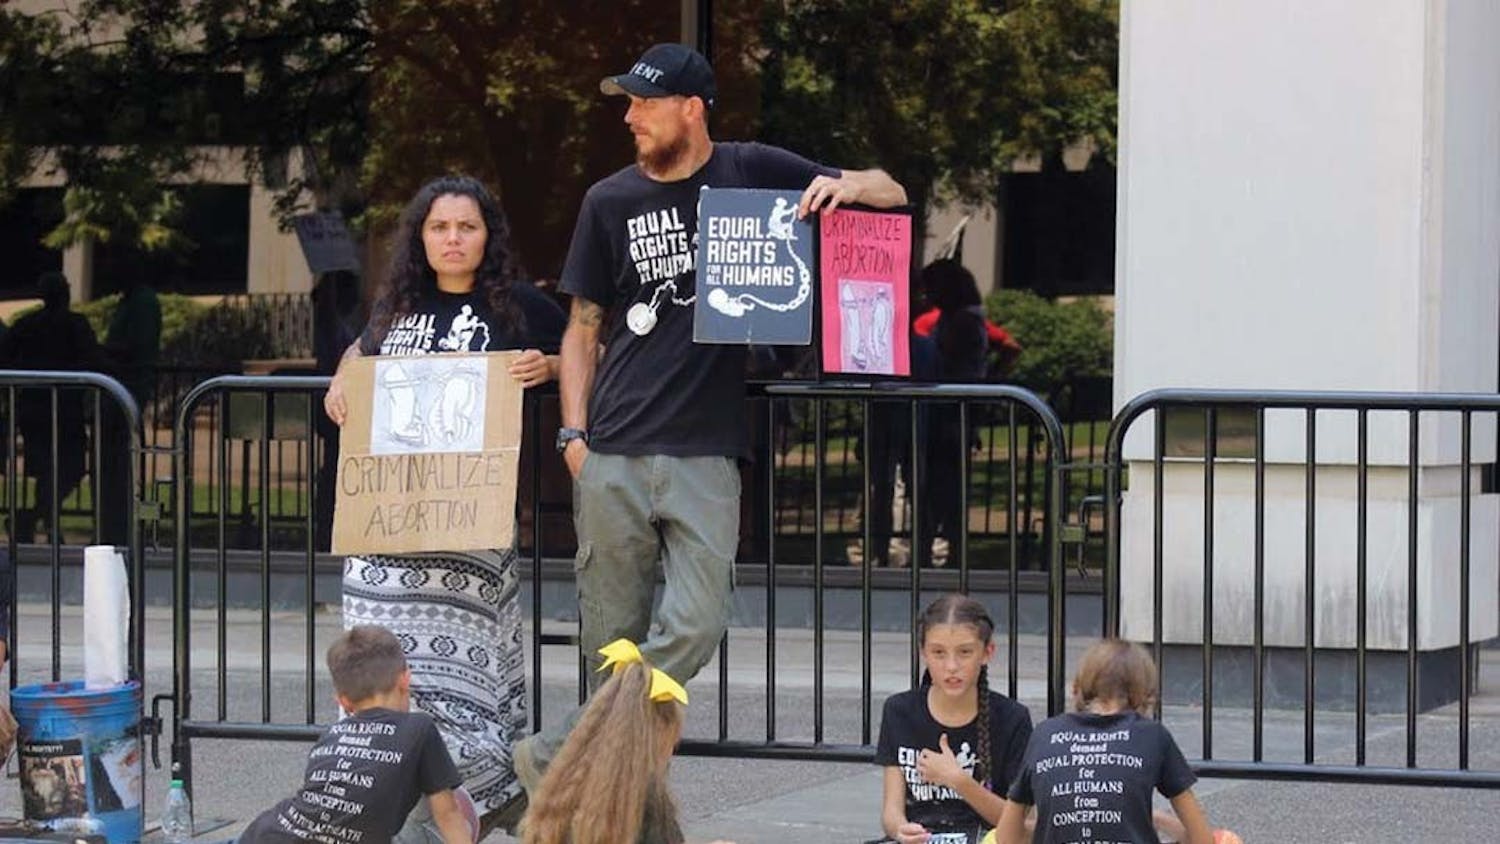 Annie Wirth and her husband call for abortion to be criminalized. Activists gathered outside the South Carolina Statehouse July 7, 2022 to voice their opinion on the state's abortion laws.